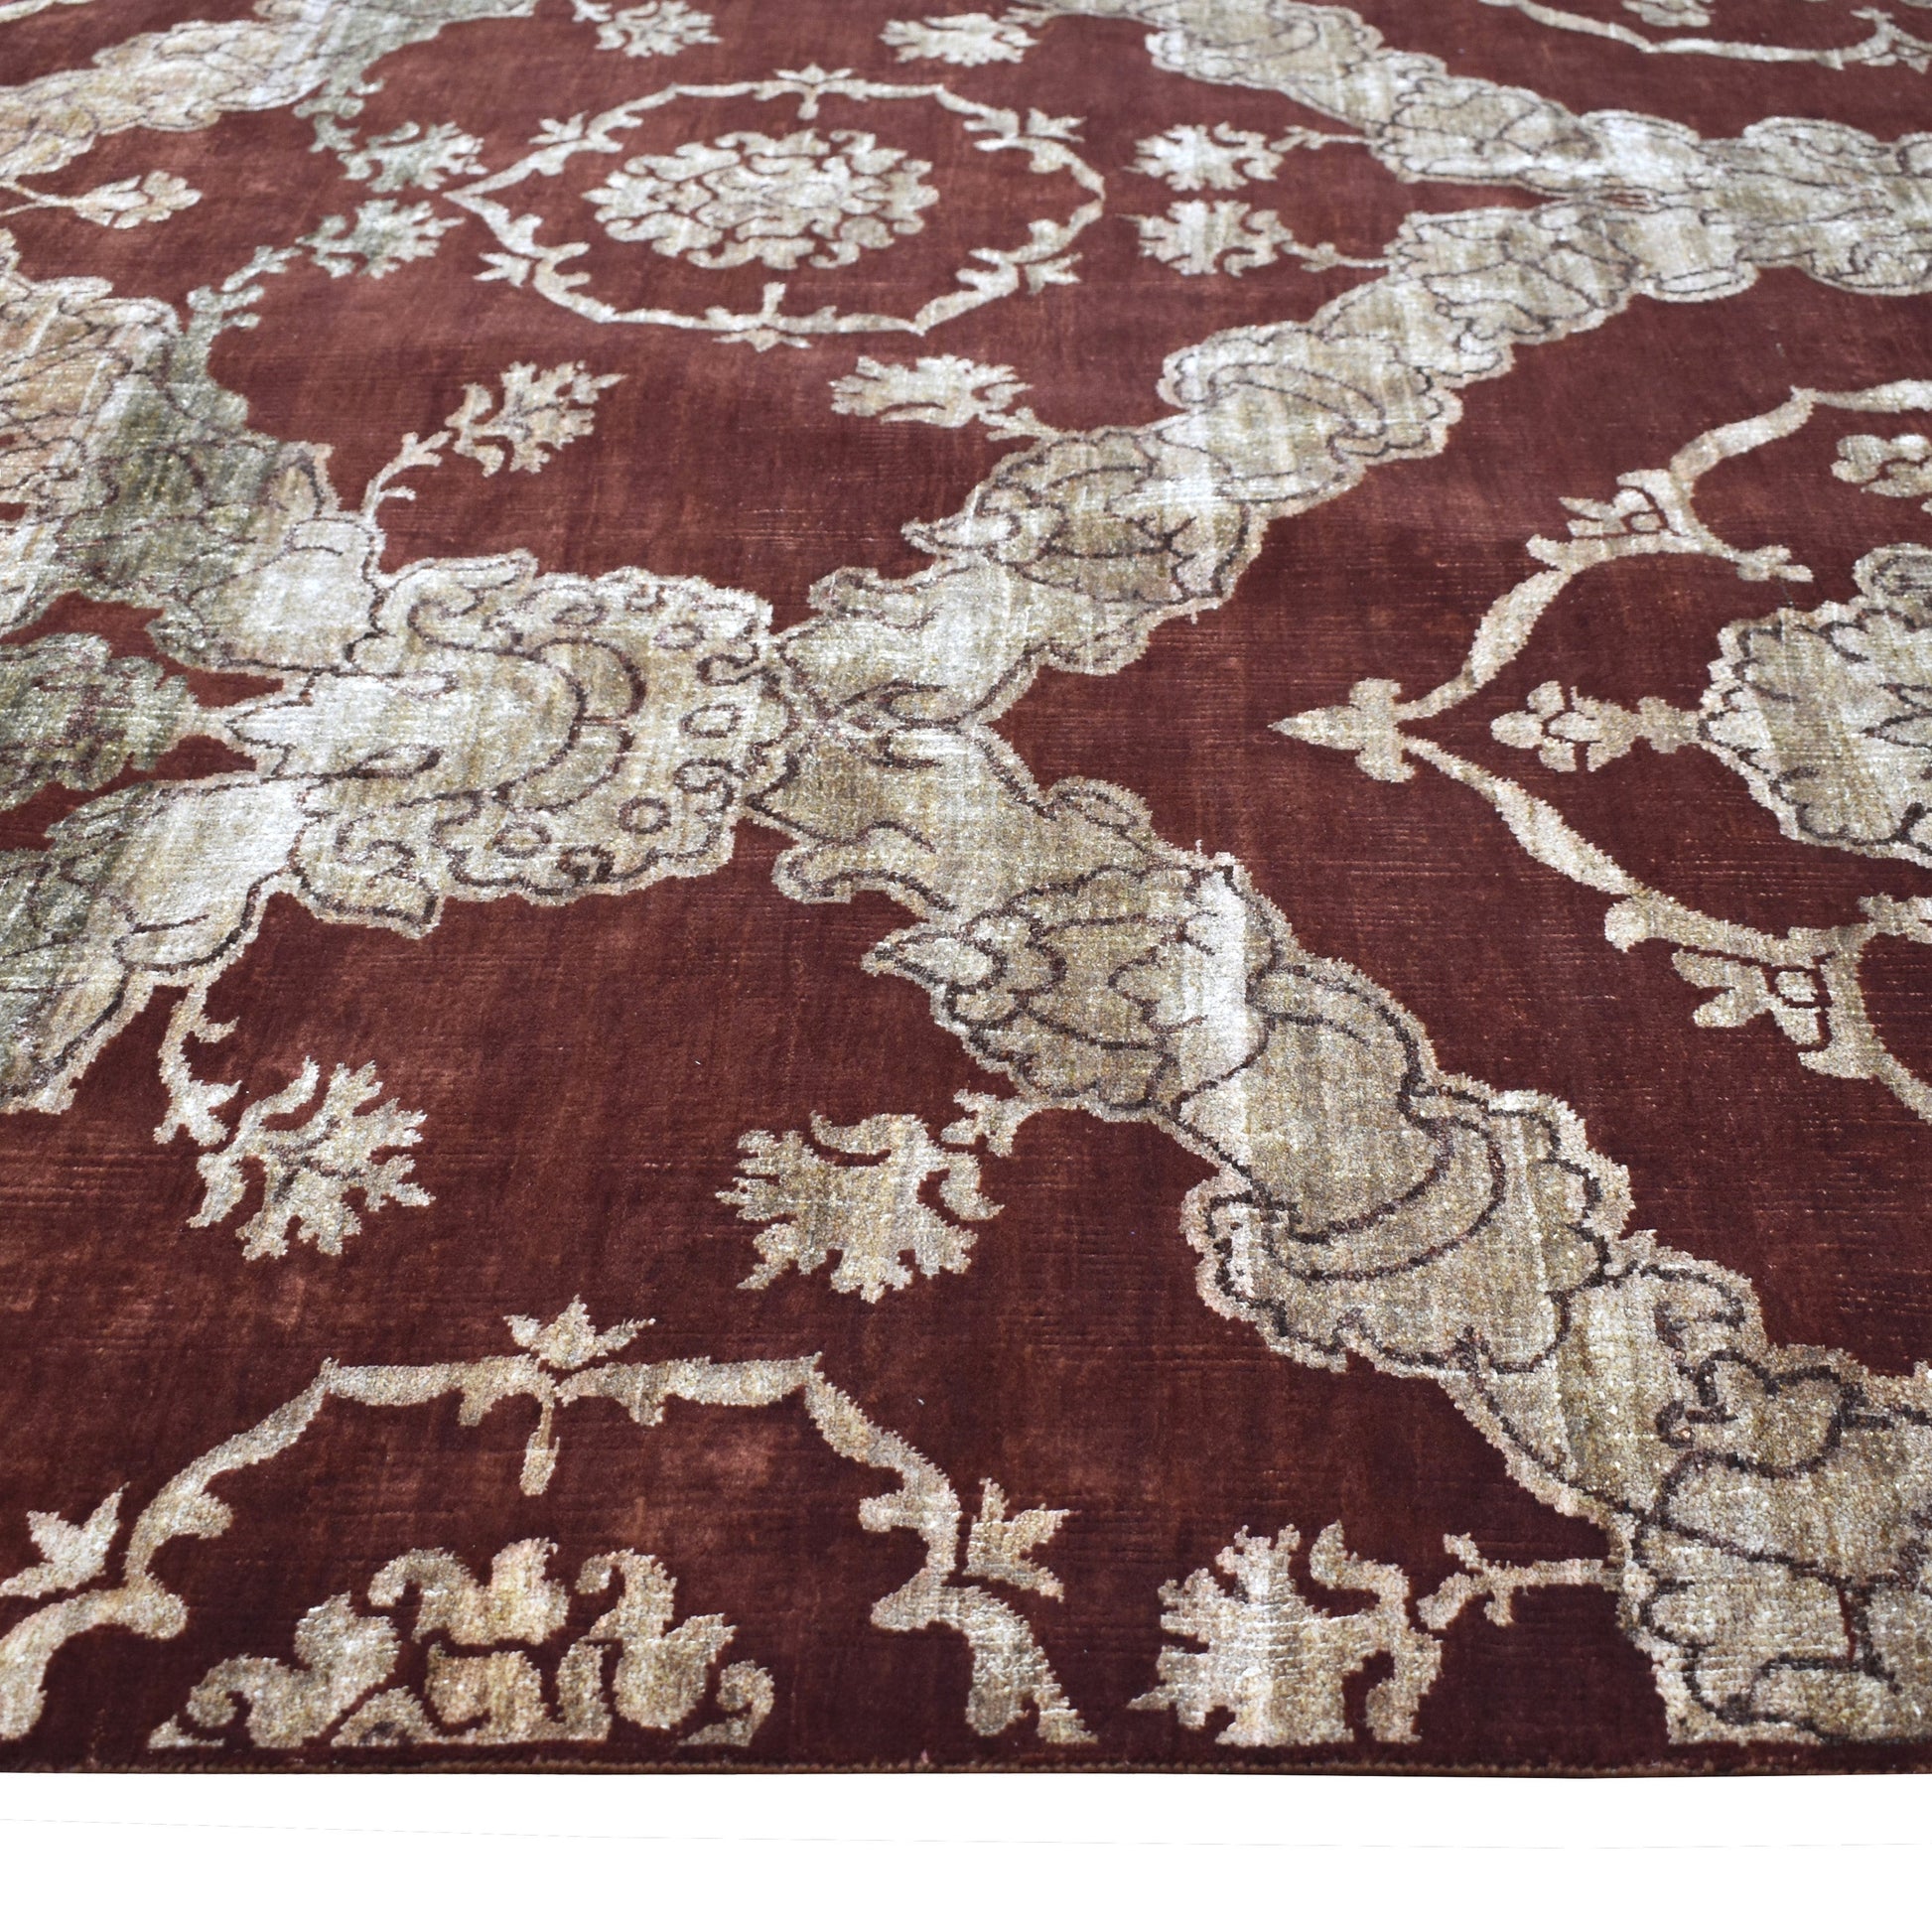 Get trendy with Damask Red, Brown and Gold Silk and Wool Transitional Handknotted Area Rug - Transitional Rugs available at Jaipur Oriental Rugs. Grab yours for $6035.00 today!